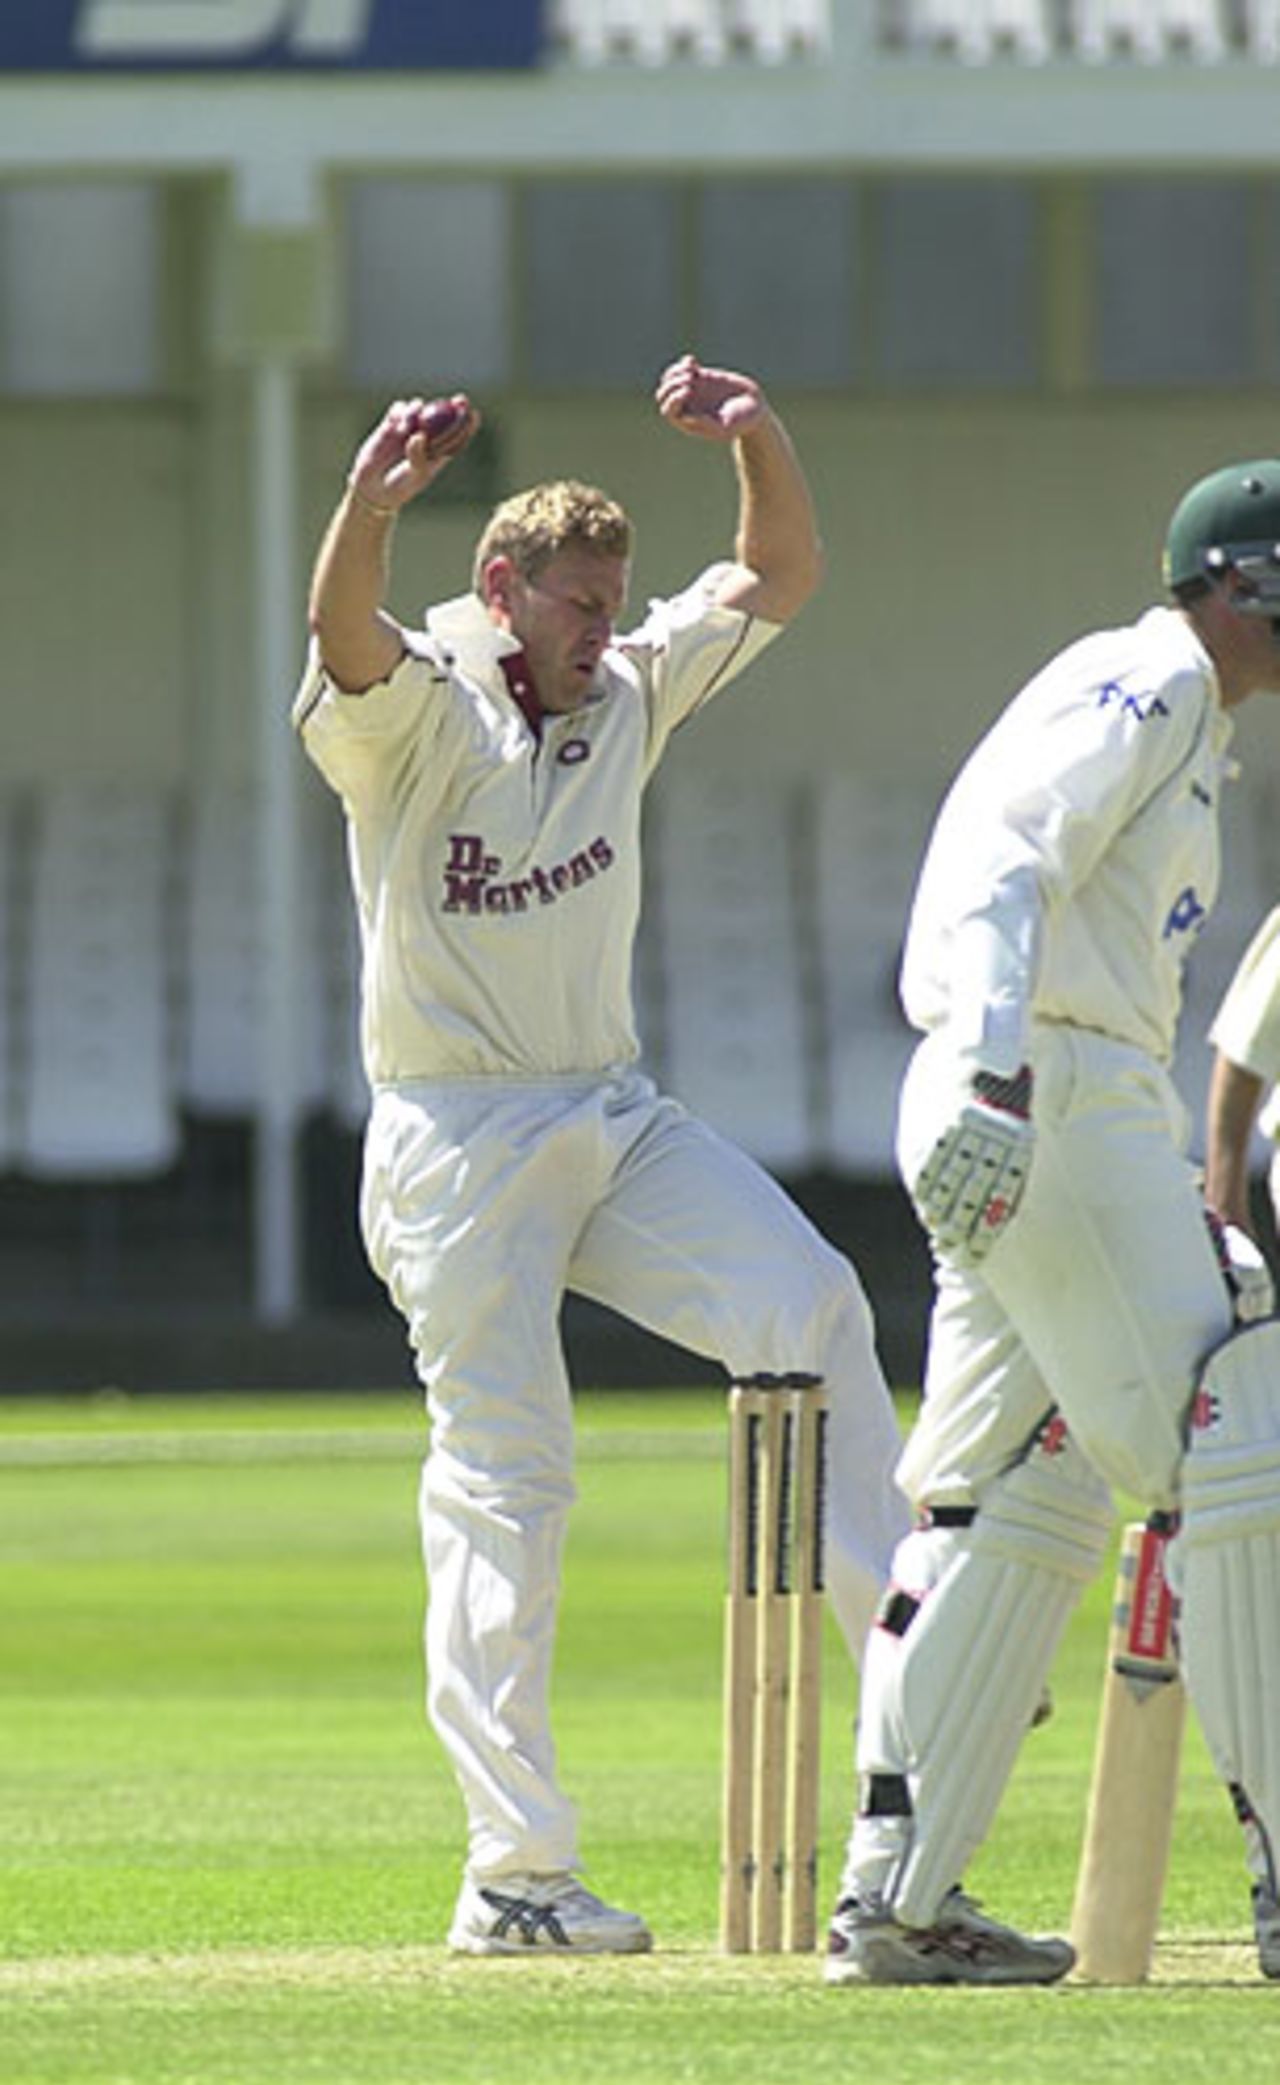 Northants Darren Cousins completely loses his bowling run up, Frizzell County Championship, Trent Bridge, 25 May 2002